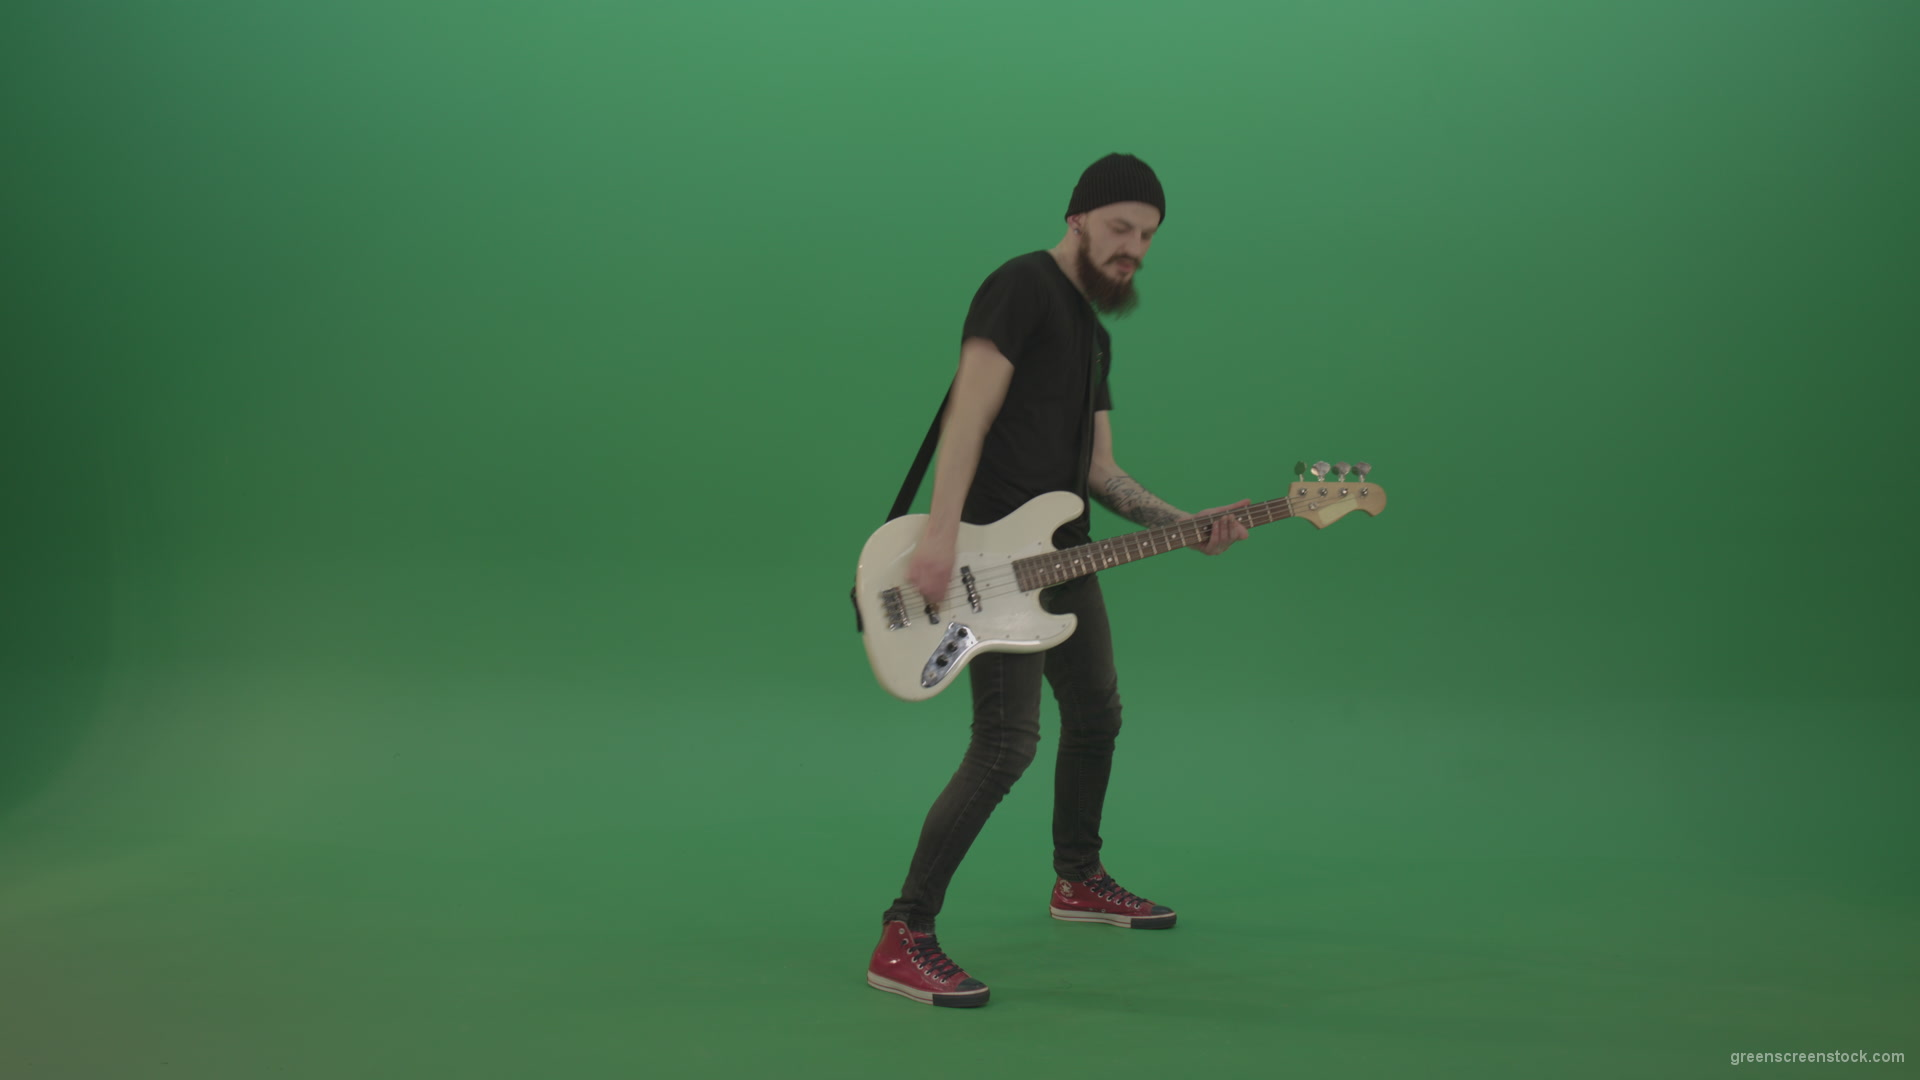 Man-play-music-instrument-bass-guitar-isolated-on-green-screen_004 Green Screen Stock